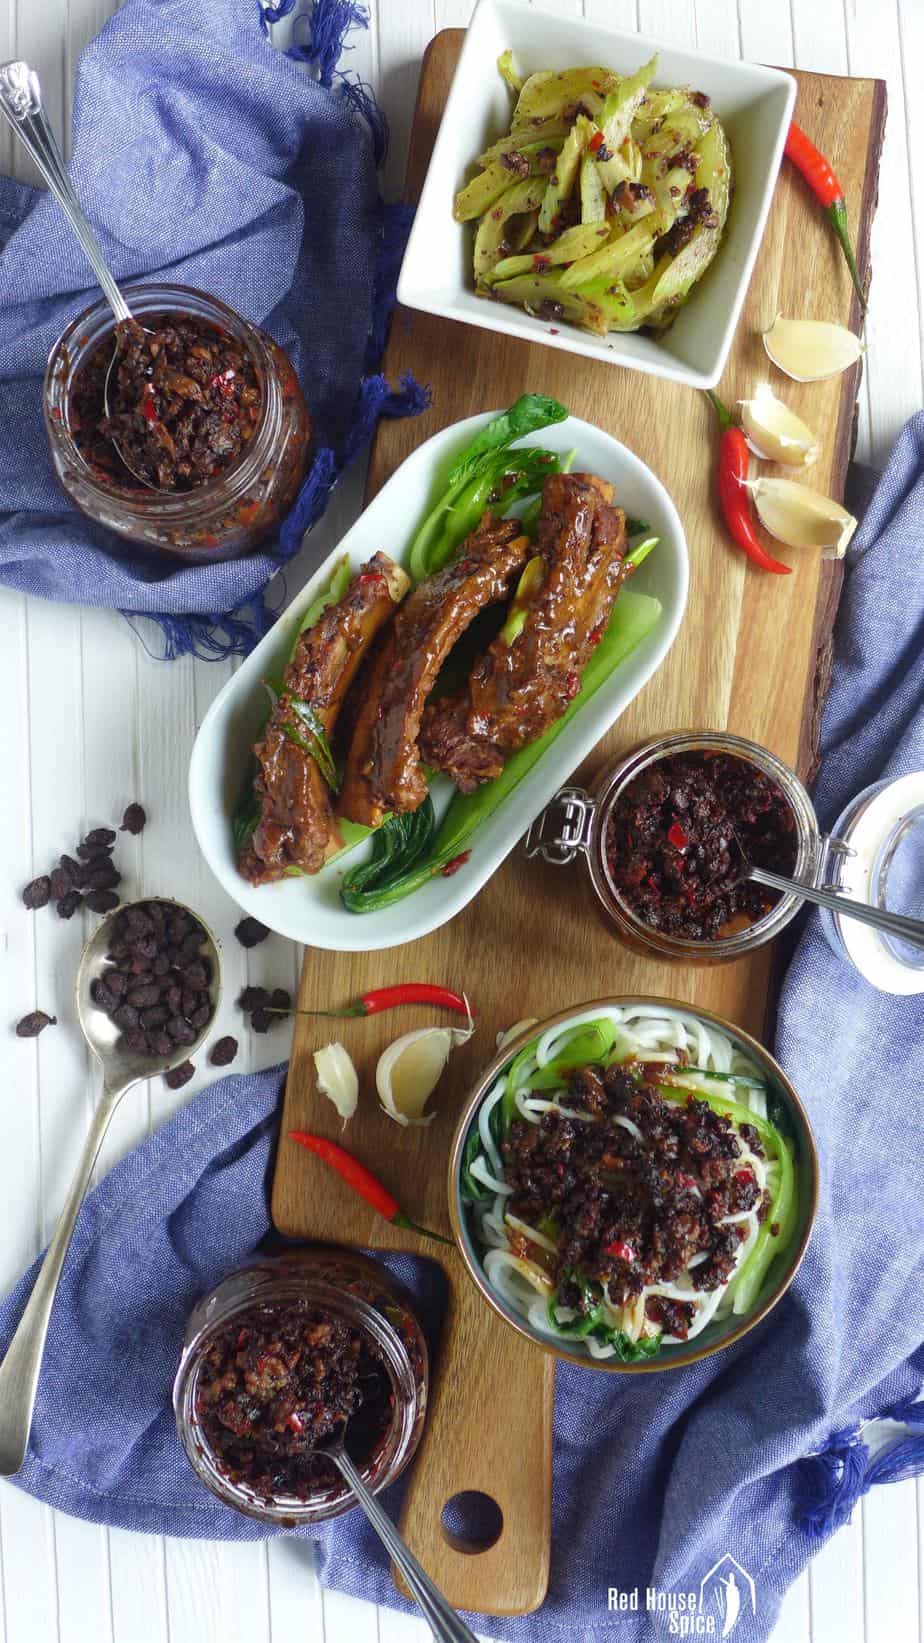 Three dishes made with spicy black bean sauce.